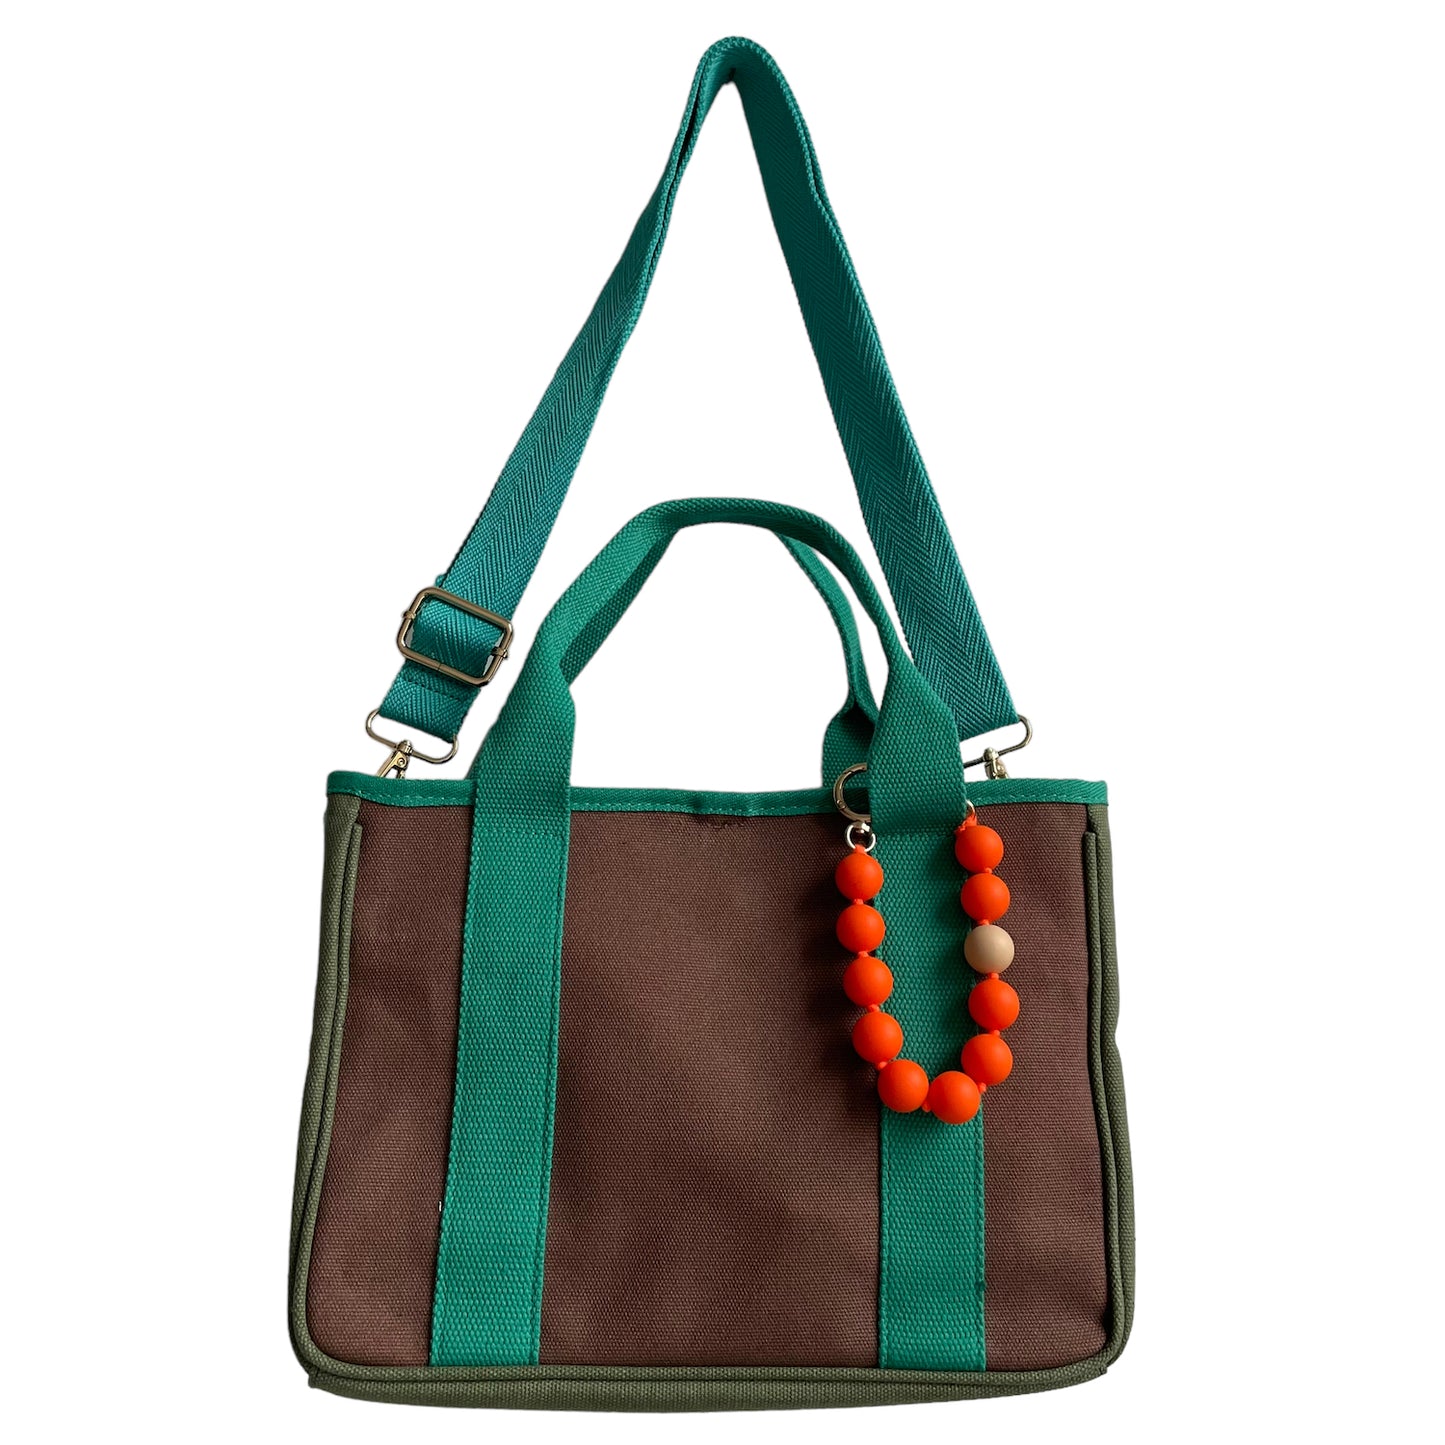 Seoul canvas bag in green & brown